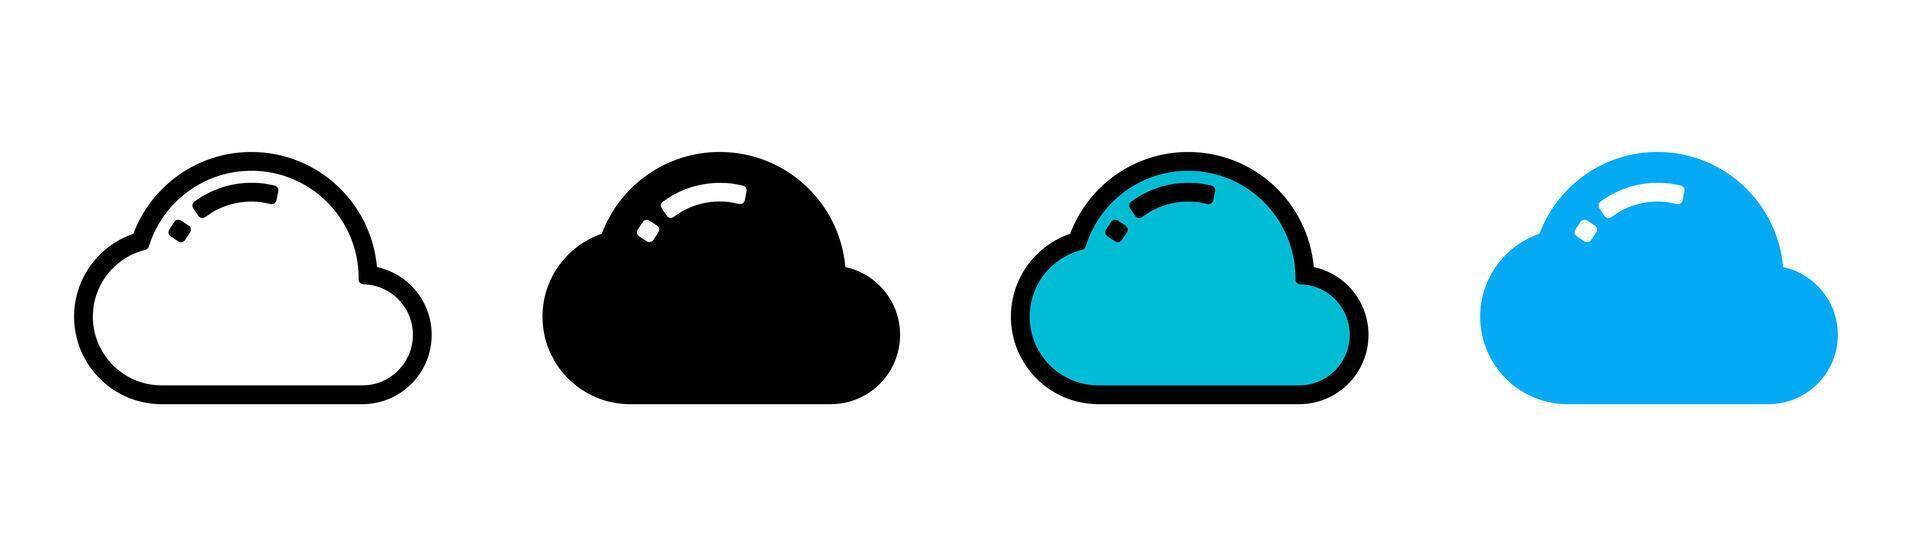 Cloud vector icon in modern style isolated on white background. cloud, internet, network concept icon for web and mobile design.